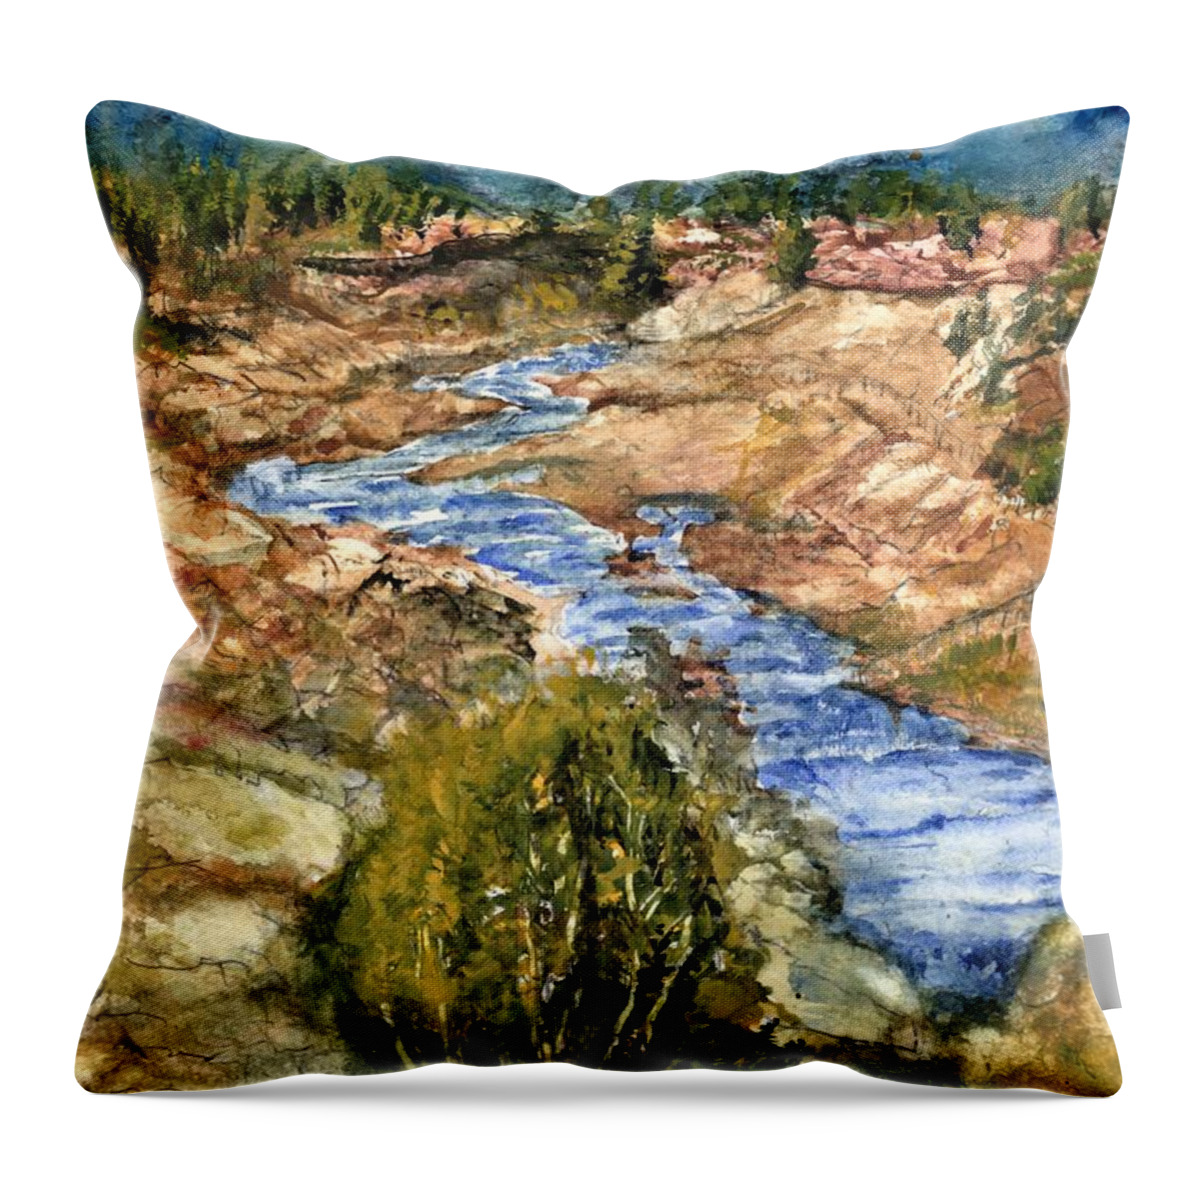 California Throw Pillow featuring the painting Eaton Canyon High Desert Creek by Randy Sprout